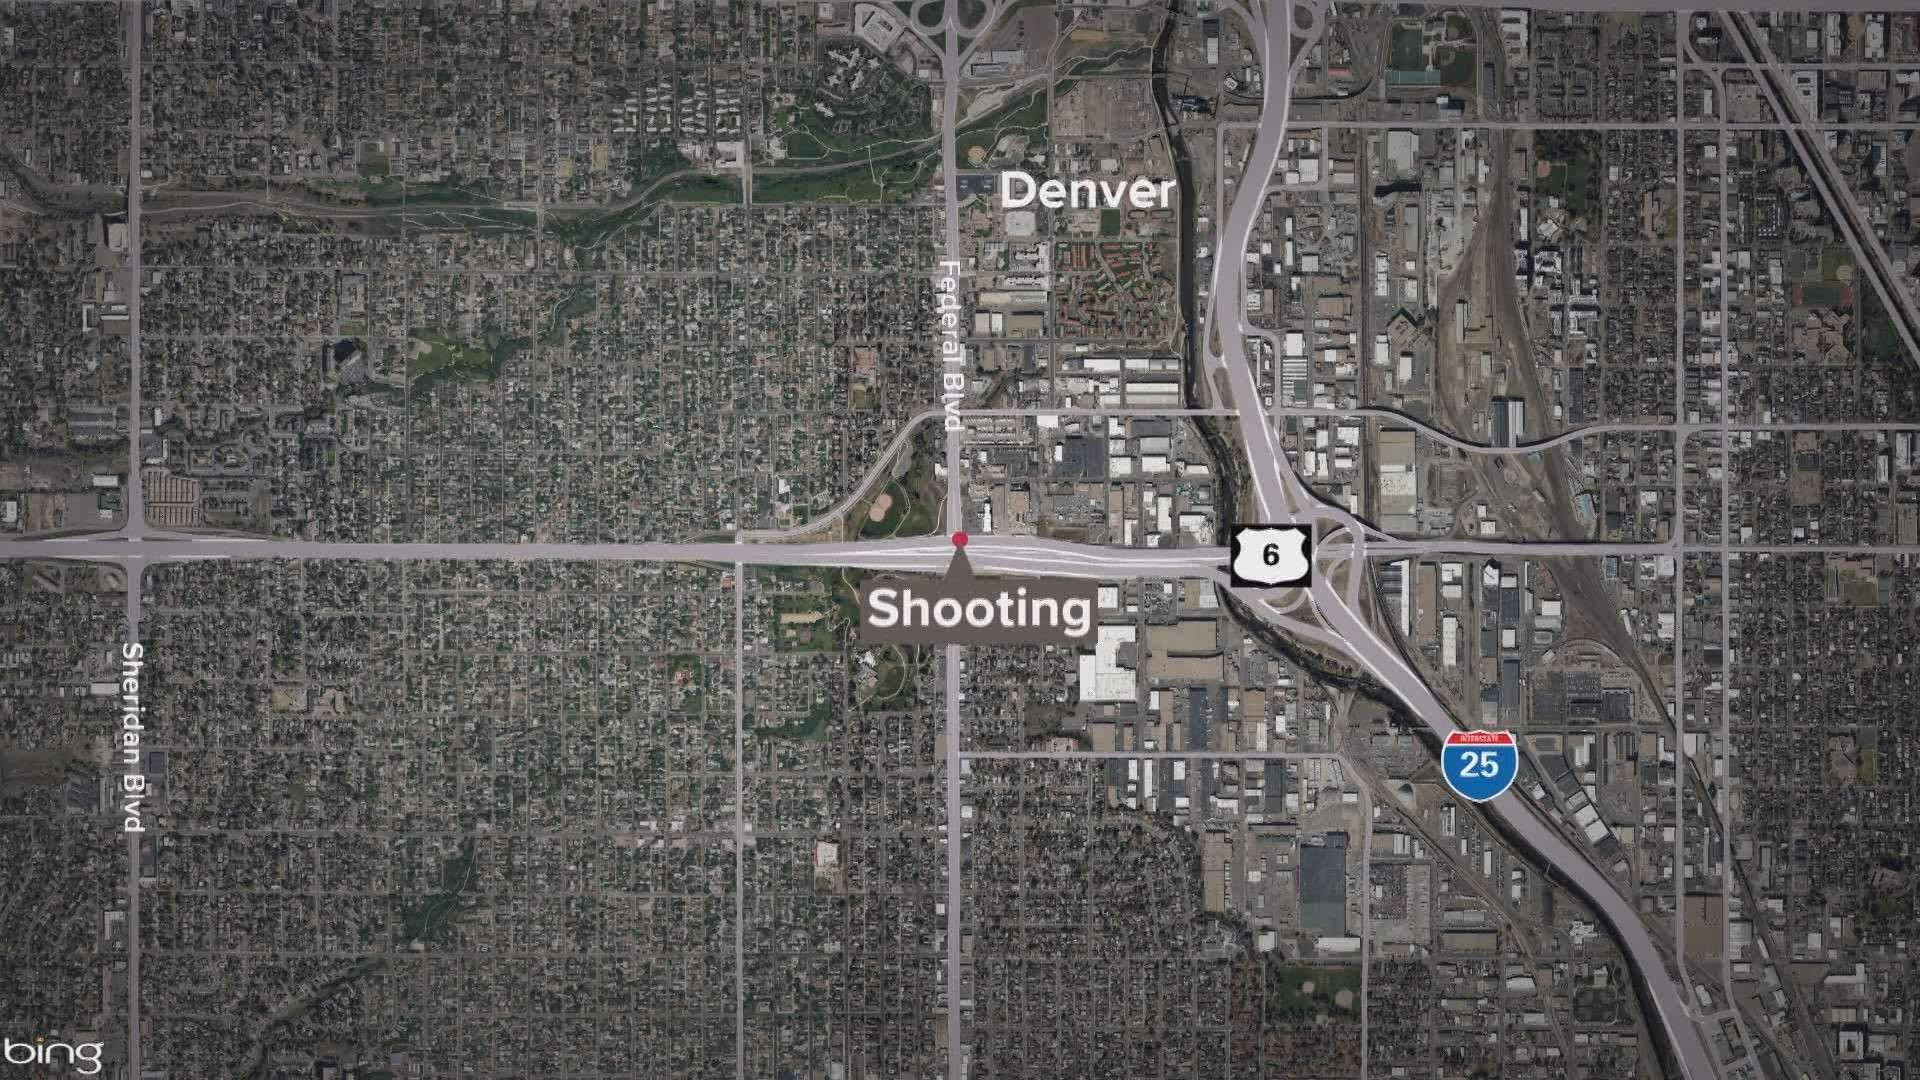 The shooting happened Thursday night in the area of 6th Avenue and Federal Boulevard.